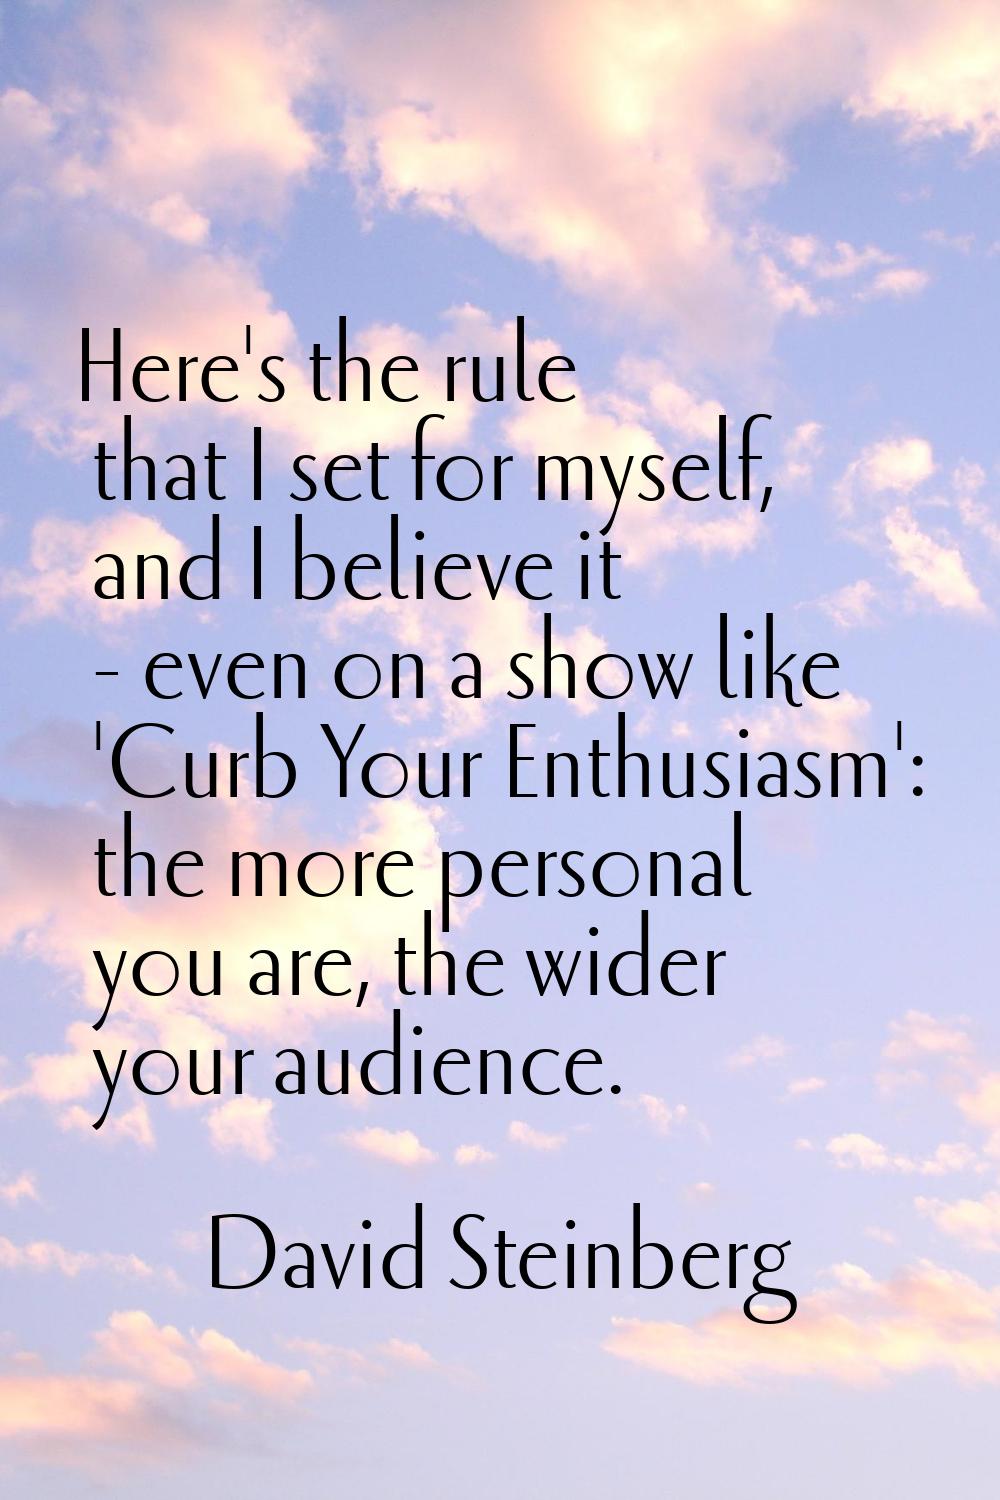 Here's the rule that I set for myself, and I believe it - even on a show like 'Curb Your Enthusiasm